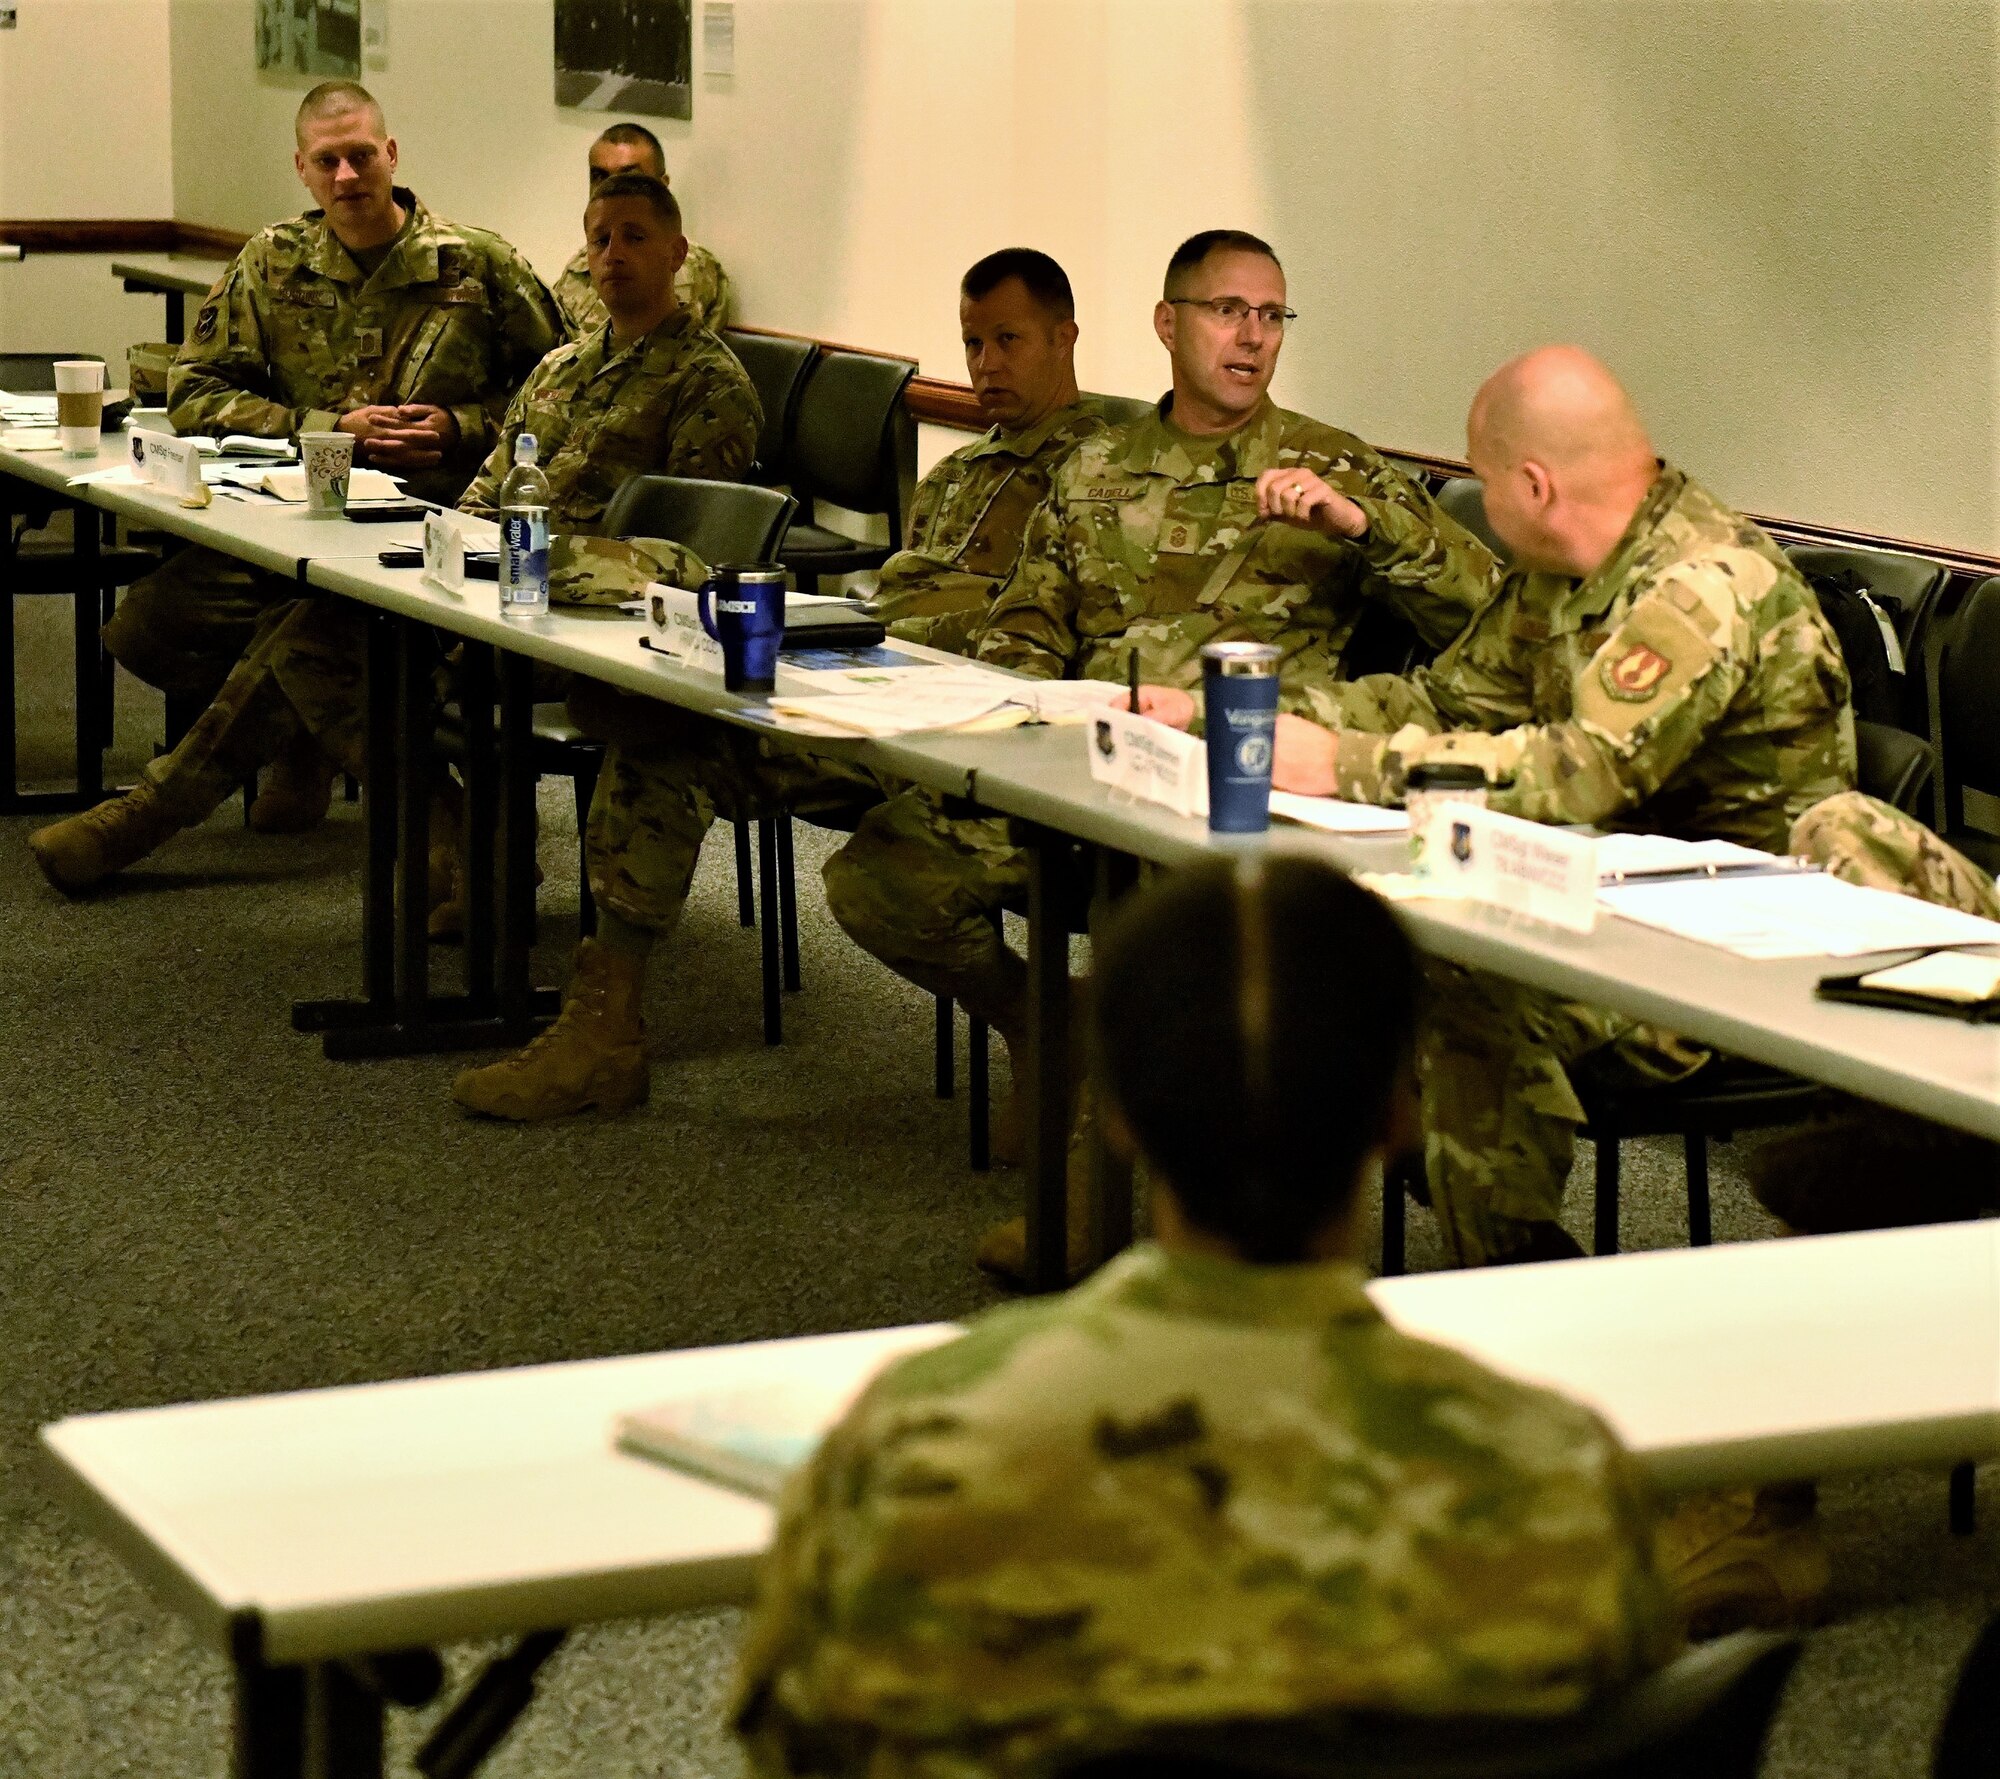 Chief Master Sgt. Stanley Cadell (second from right) provides a headquarters perspective on an Airman issue during the inaugural AFMC Command Chief Orientation, Oct. 1, at Wright-Patterson Air Force Base, Ohio. The two day event, was designed to familiarize new AFMC wing and center command chiefs with the overall organizational mission and how their units fit into the bigger picture. (Air Force Photo by Darrius Parker/released)